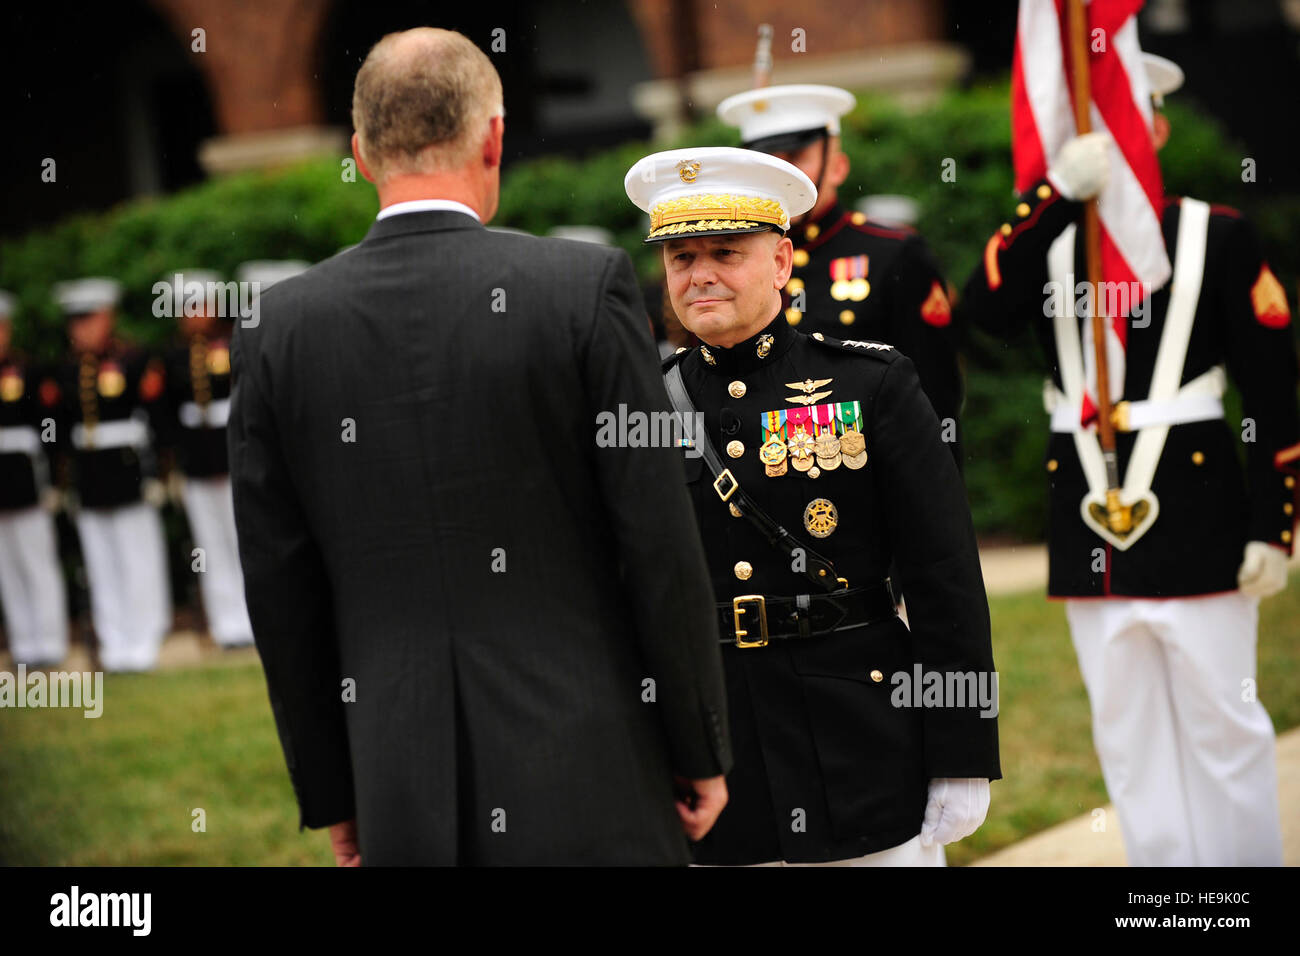 Deputy Secretary of Defense William J. Lynn prepares to award Joint Chiefs of Staff Vice Chairman Gen. James E. Cartwright the Defense Distinguished Service Medal at the Marine Corps Barracks, Washington, D.C., Aug. 3, 2011.  Tech. Sgt. Jacob N. Bailey, U.S. Air Force Stock Photo